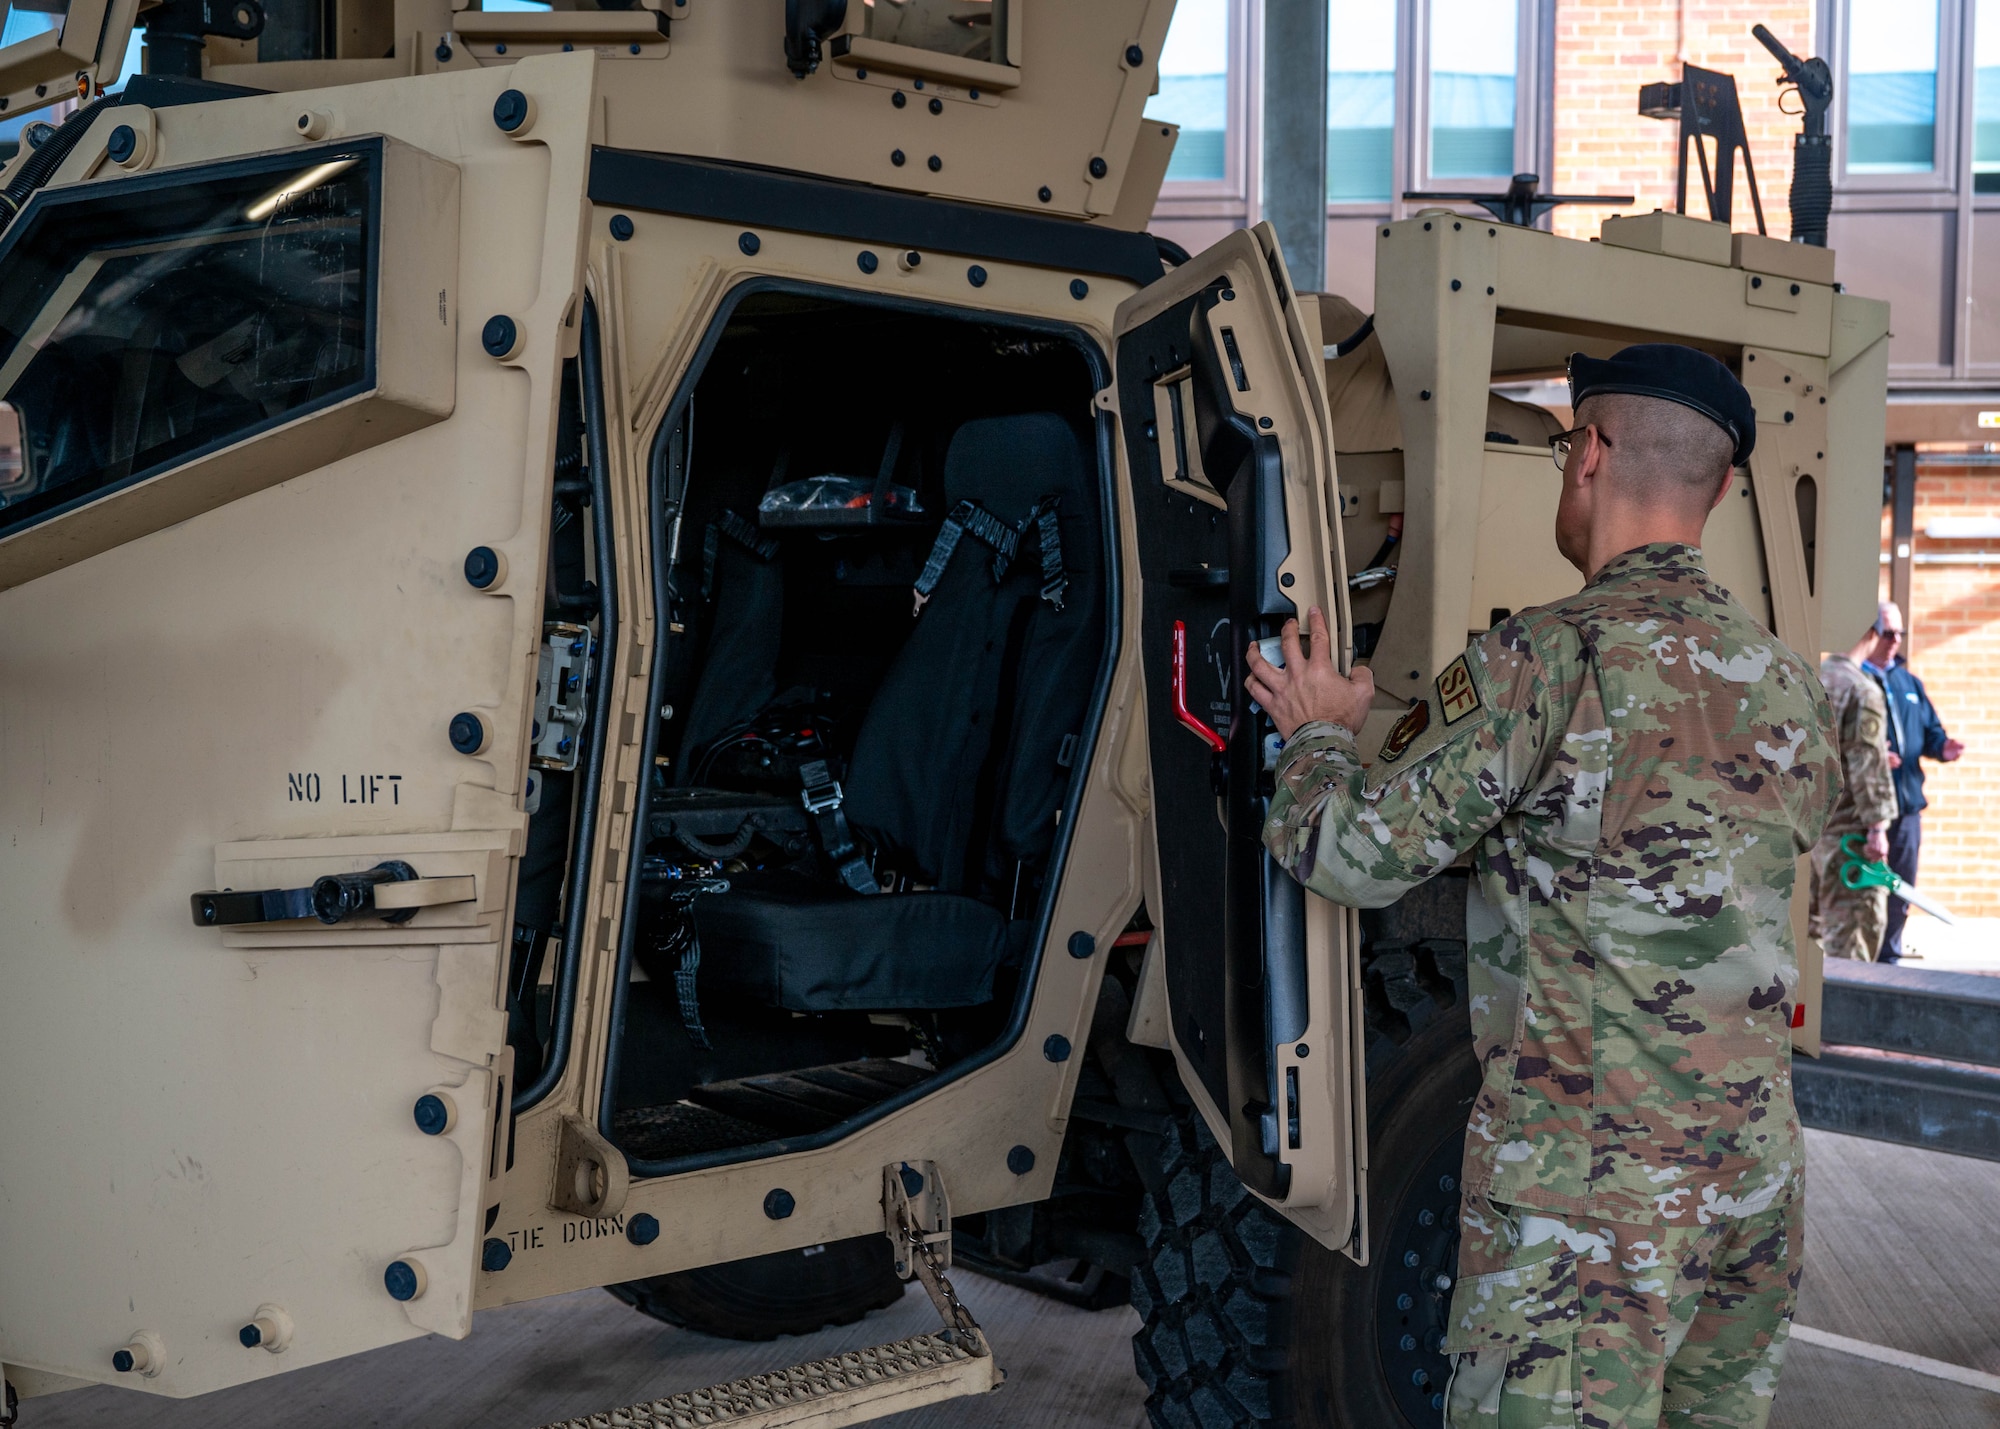 A U.S. military members opens the door of a new vehicle